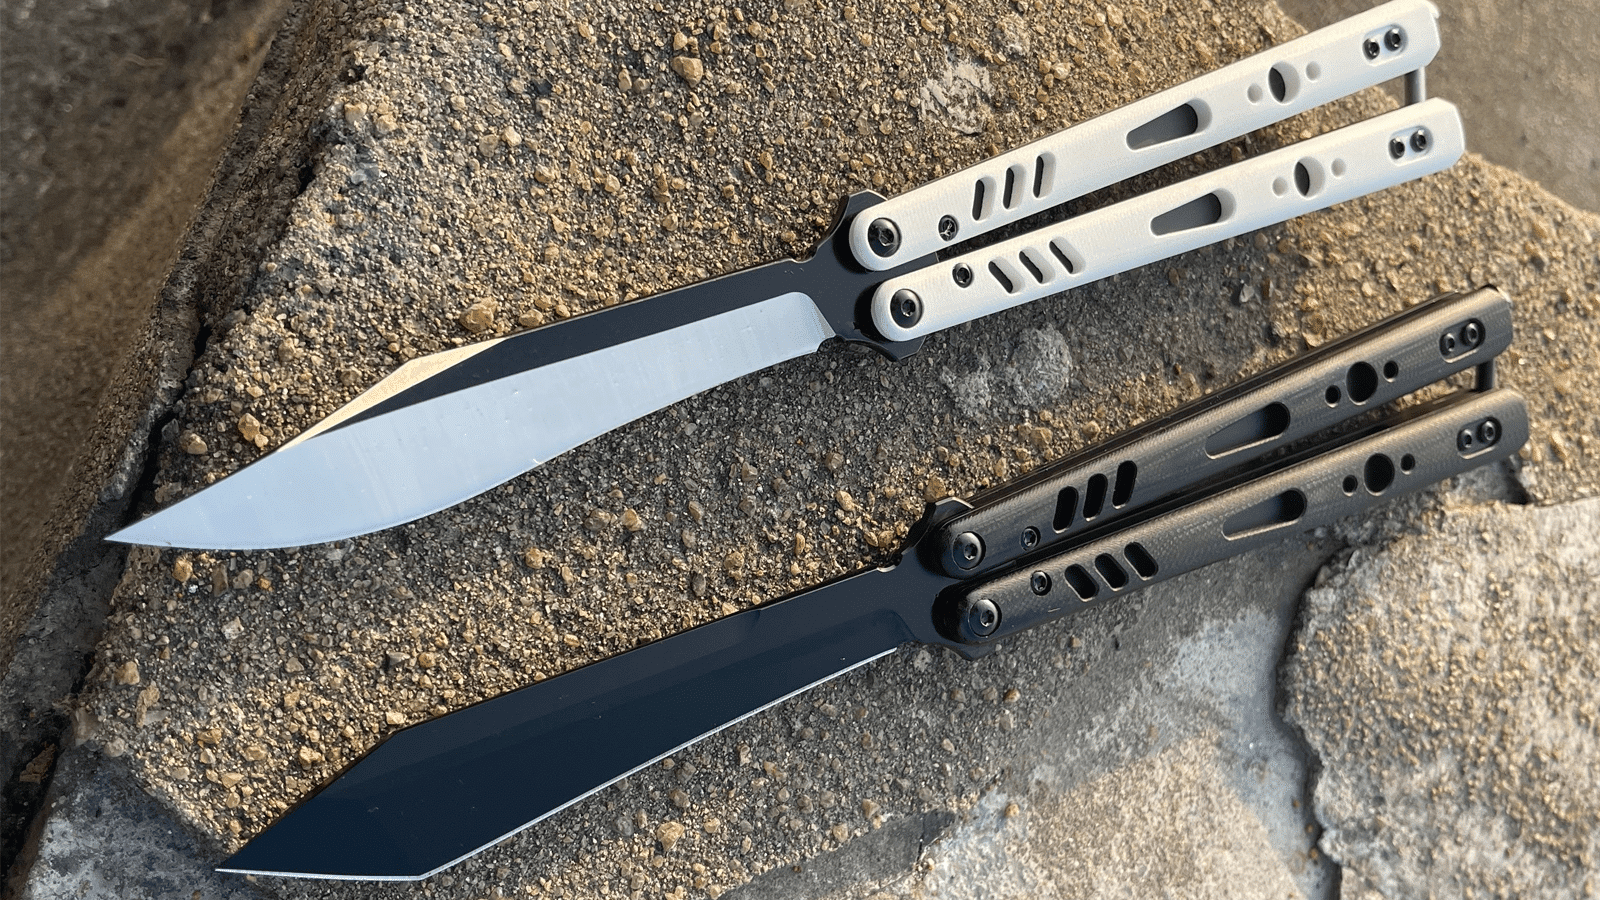 Are Balisong Trainers Legal in Australia?